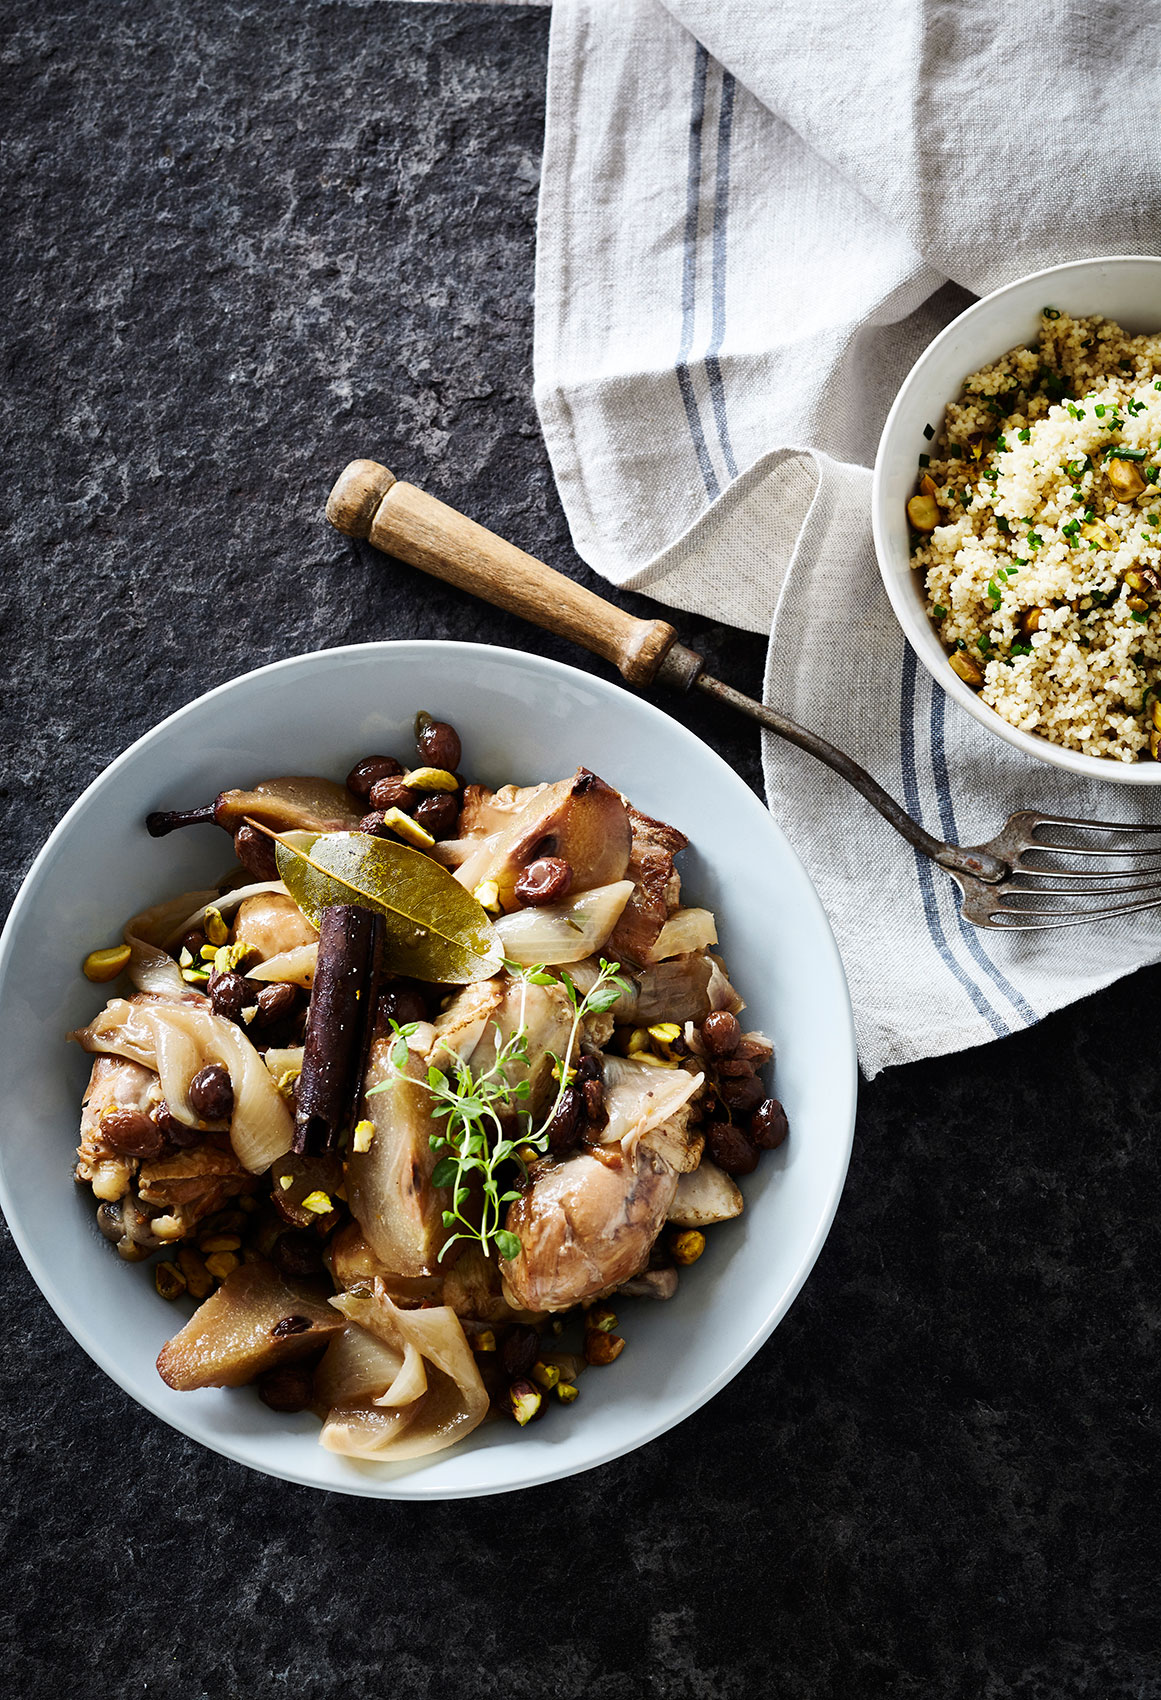 Slow Cooked • Pear Casserole with Fresh Herbs & Couscous • Cookbook & Editorial Food Photography